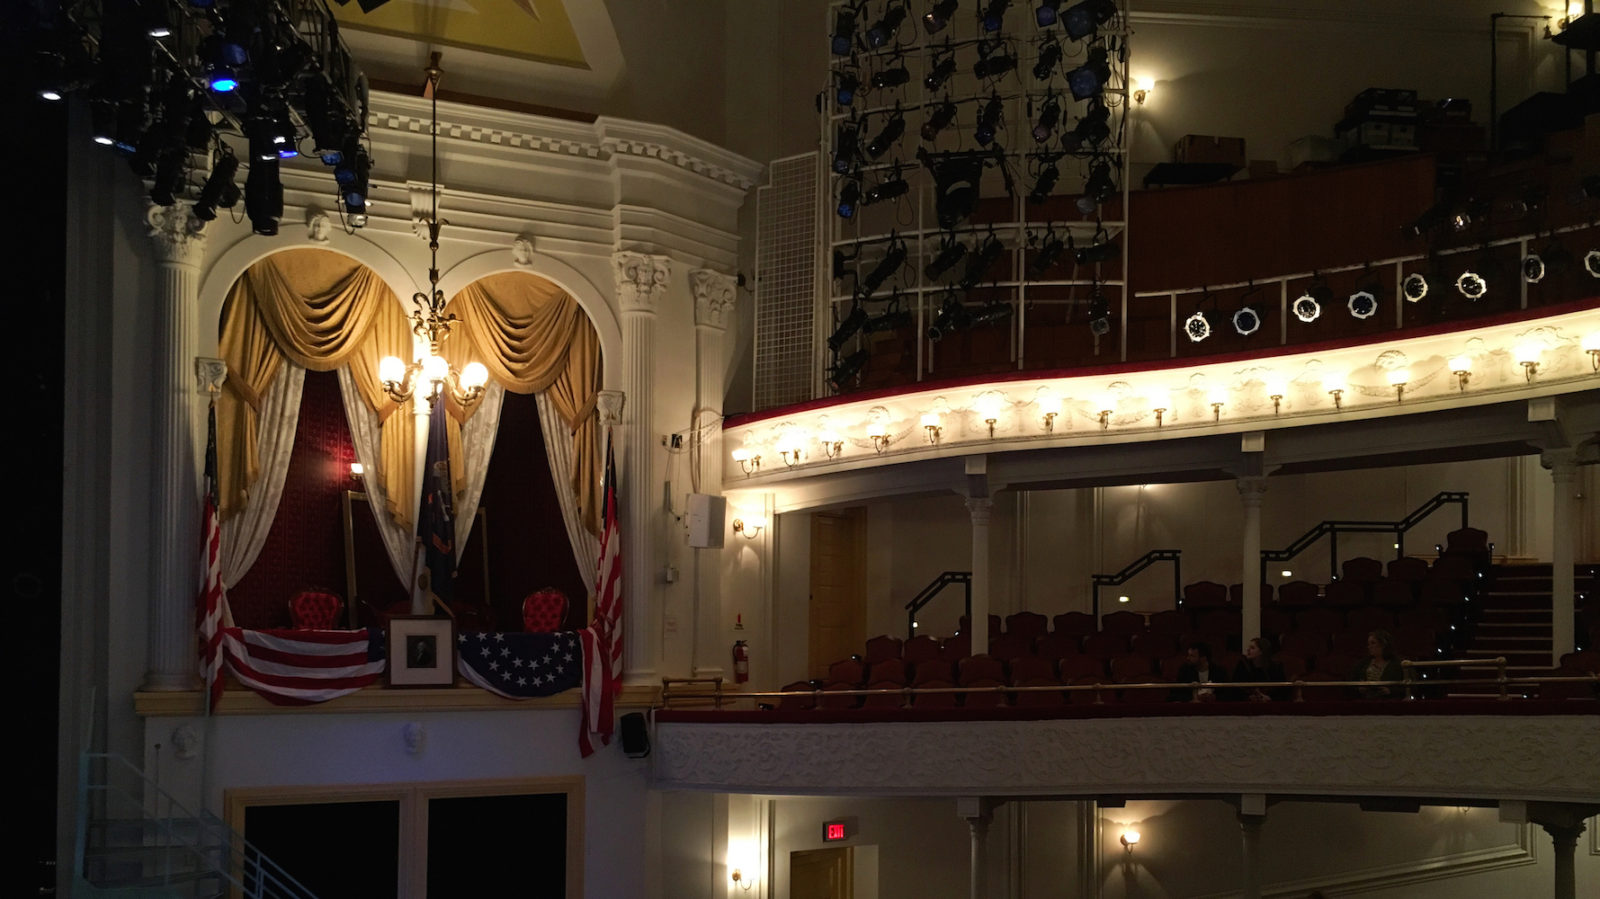 Ford’s Theatre Adventures in DC